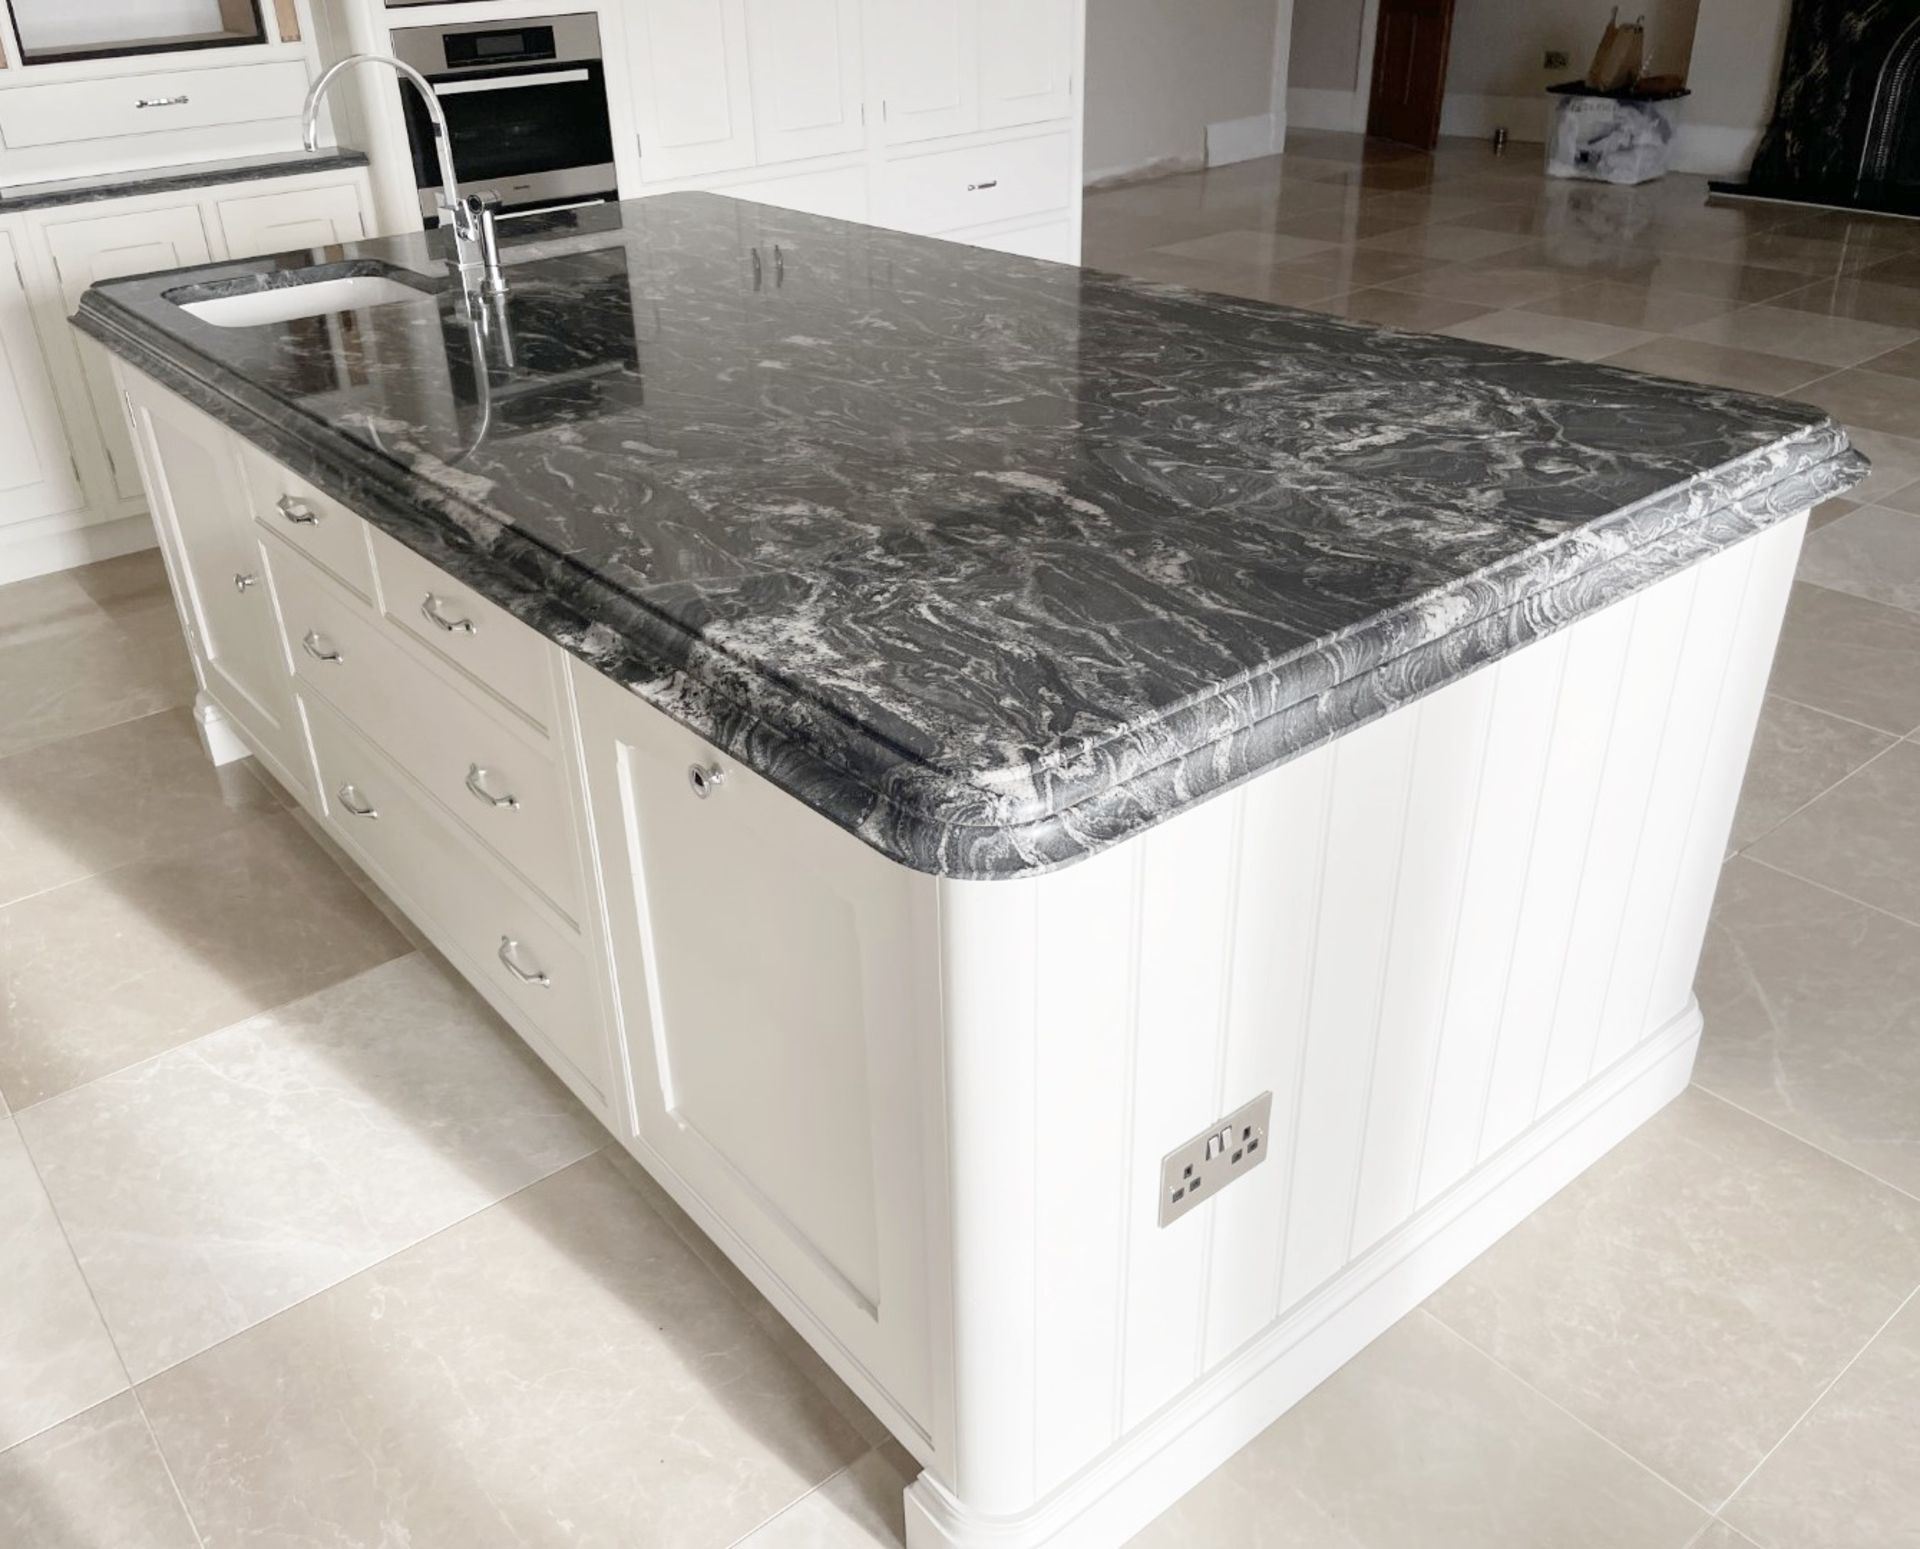 1 x Bespoke Handcrafted Shaker-style Fitted Kitchen Marble Surfaces, Island & Miele Appliances - Image 79 of 221